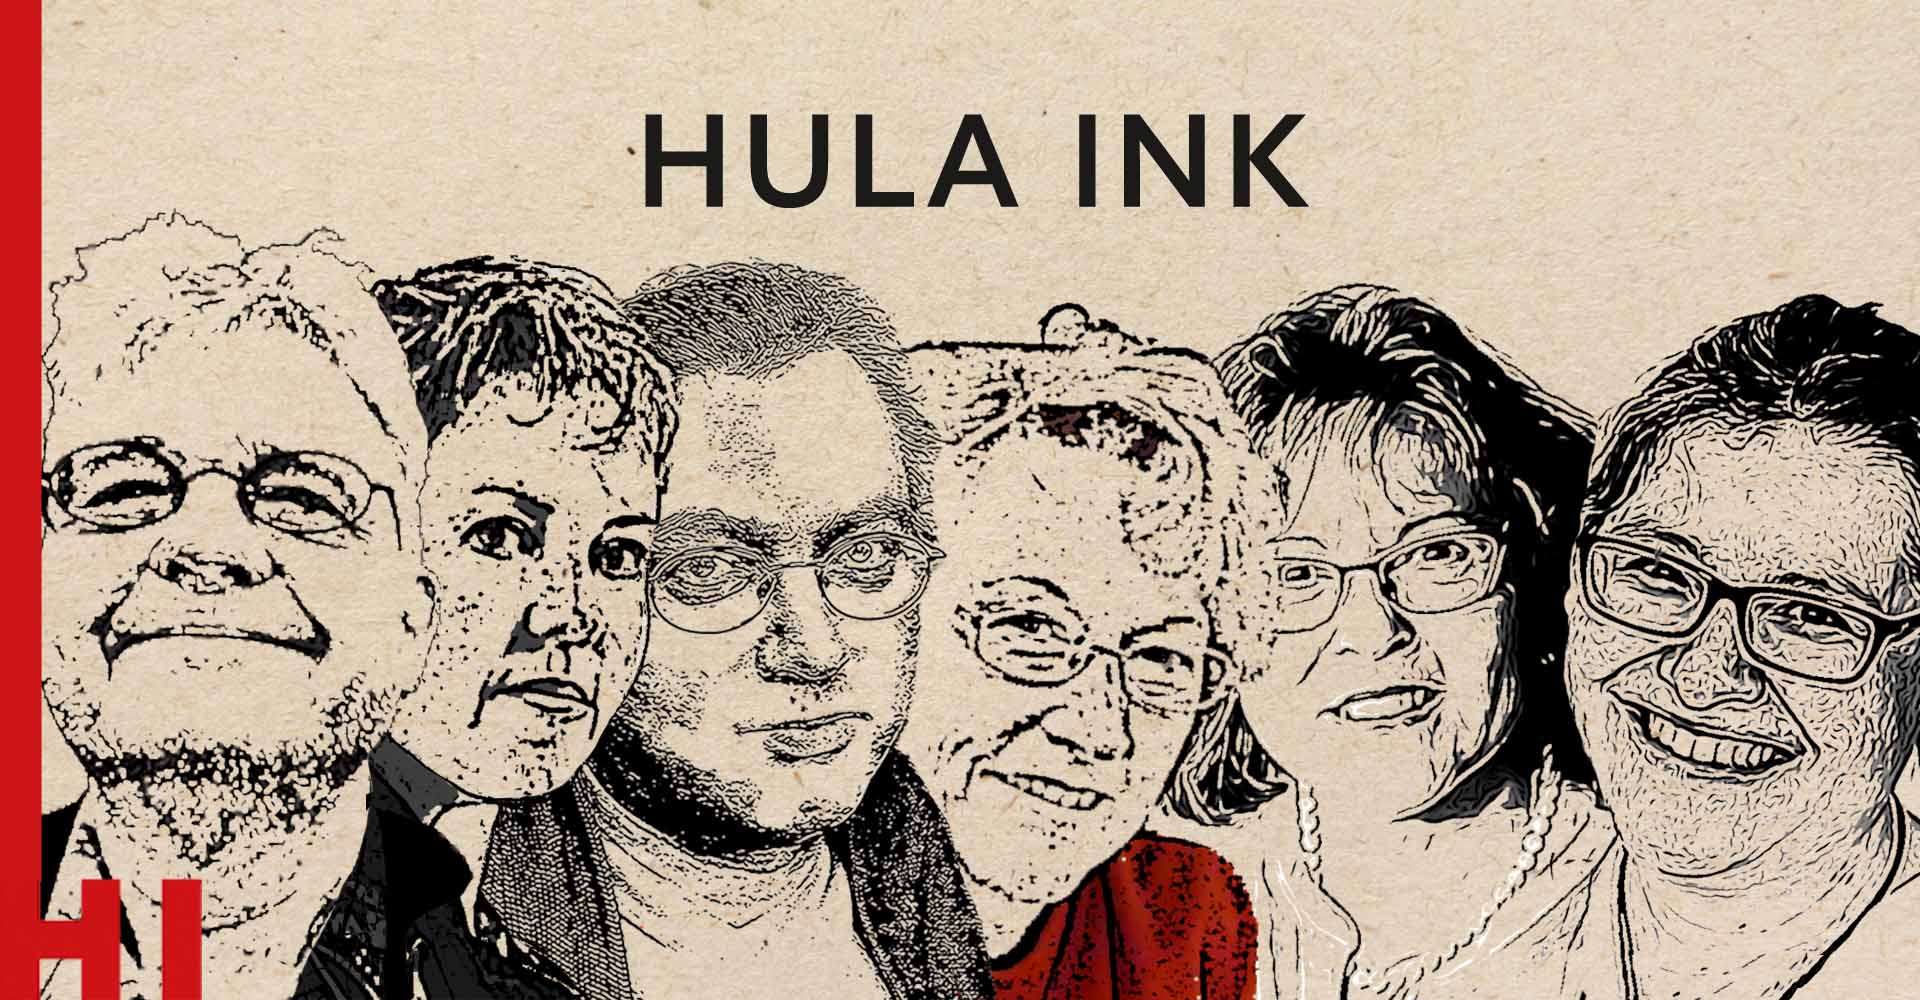 This is Hula Ink